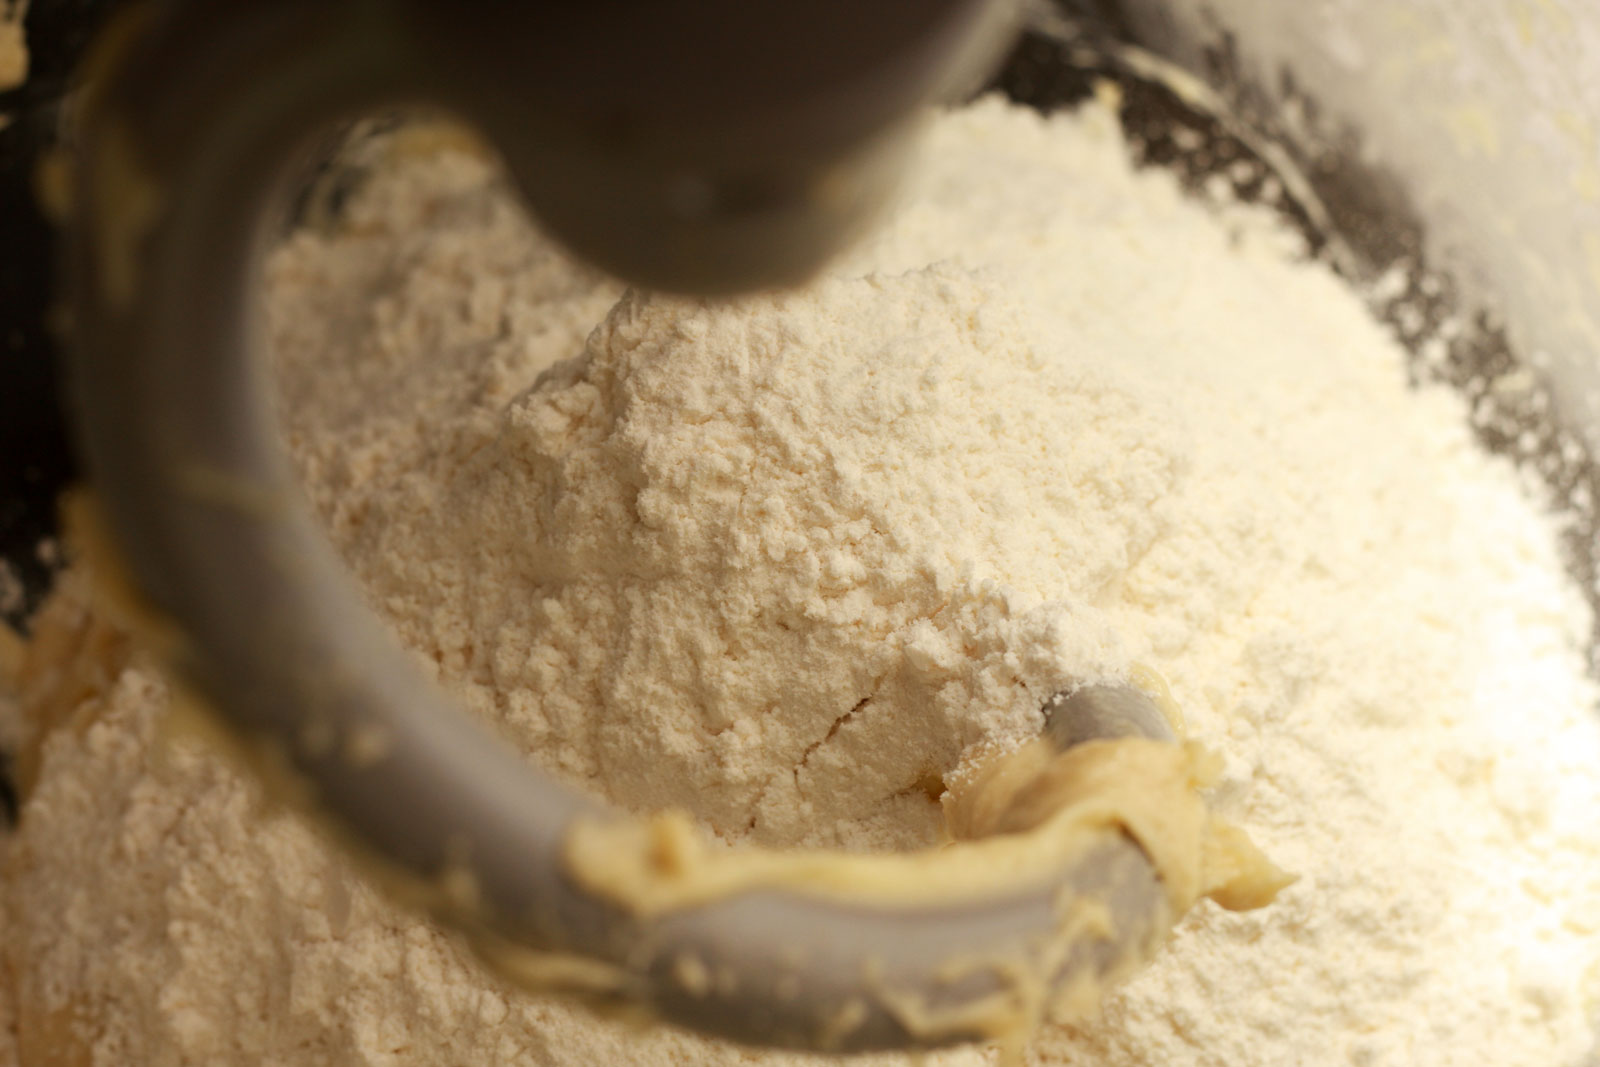 Additional flour is worked into the dough using a dough hook